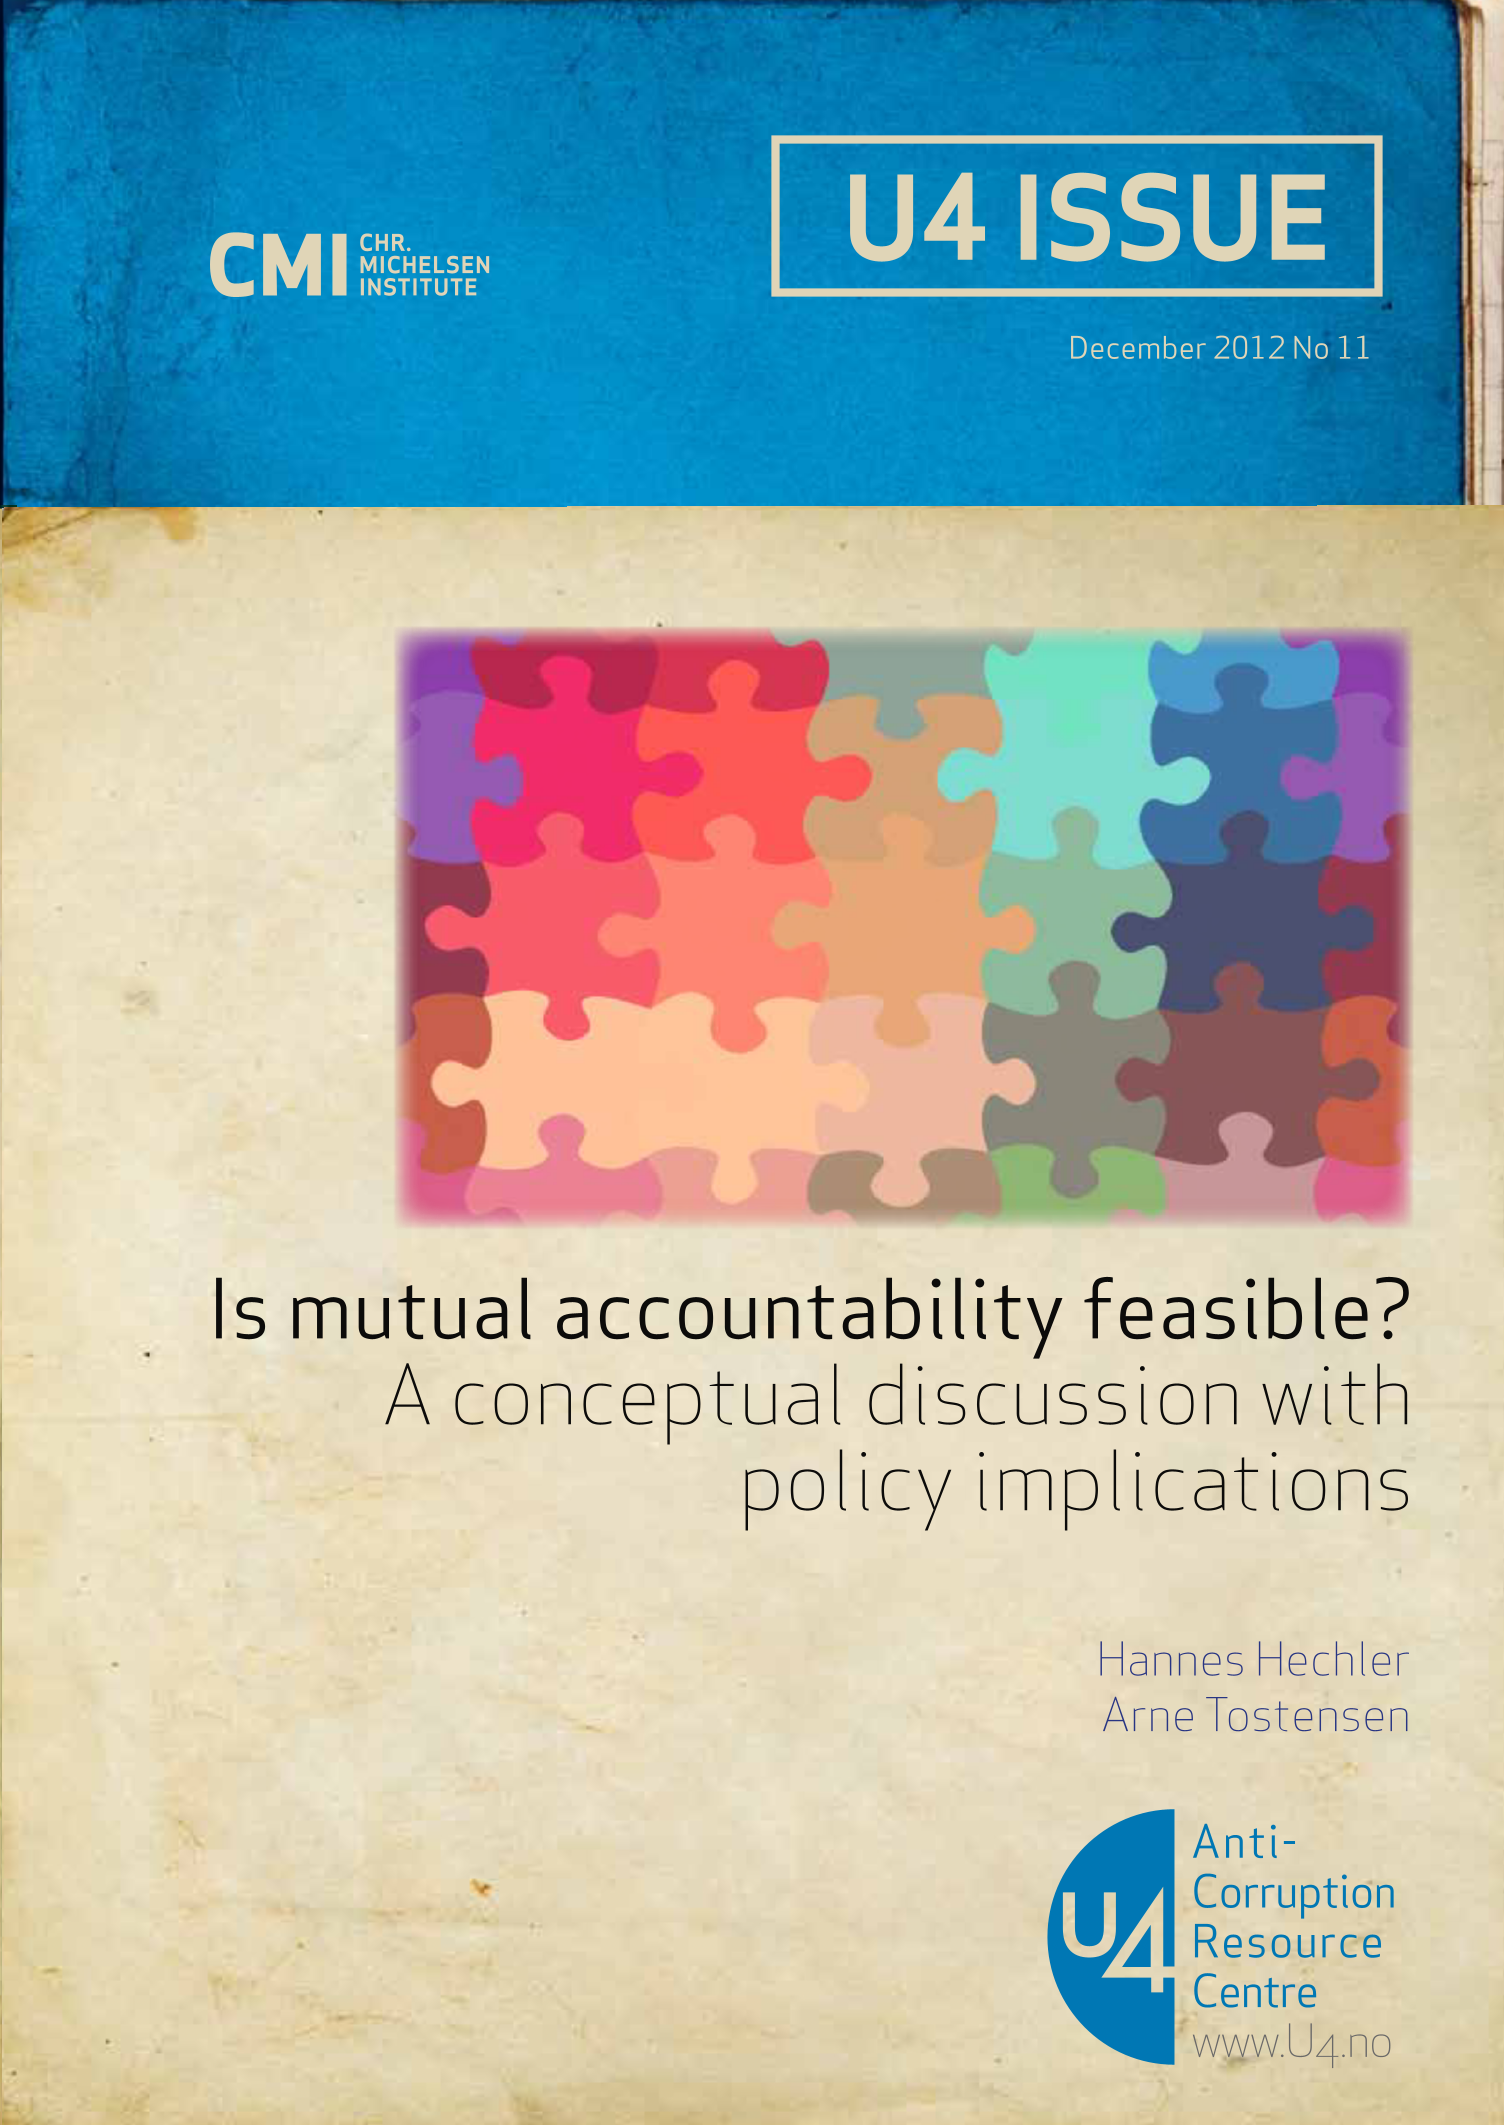 Is mutual accountability feasible? A conceptual discussion with policy implications